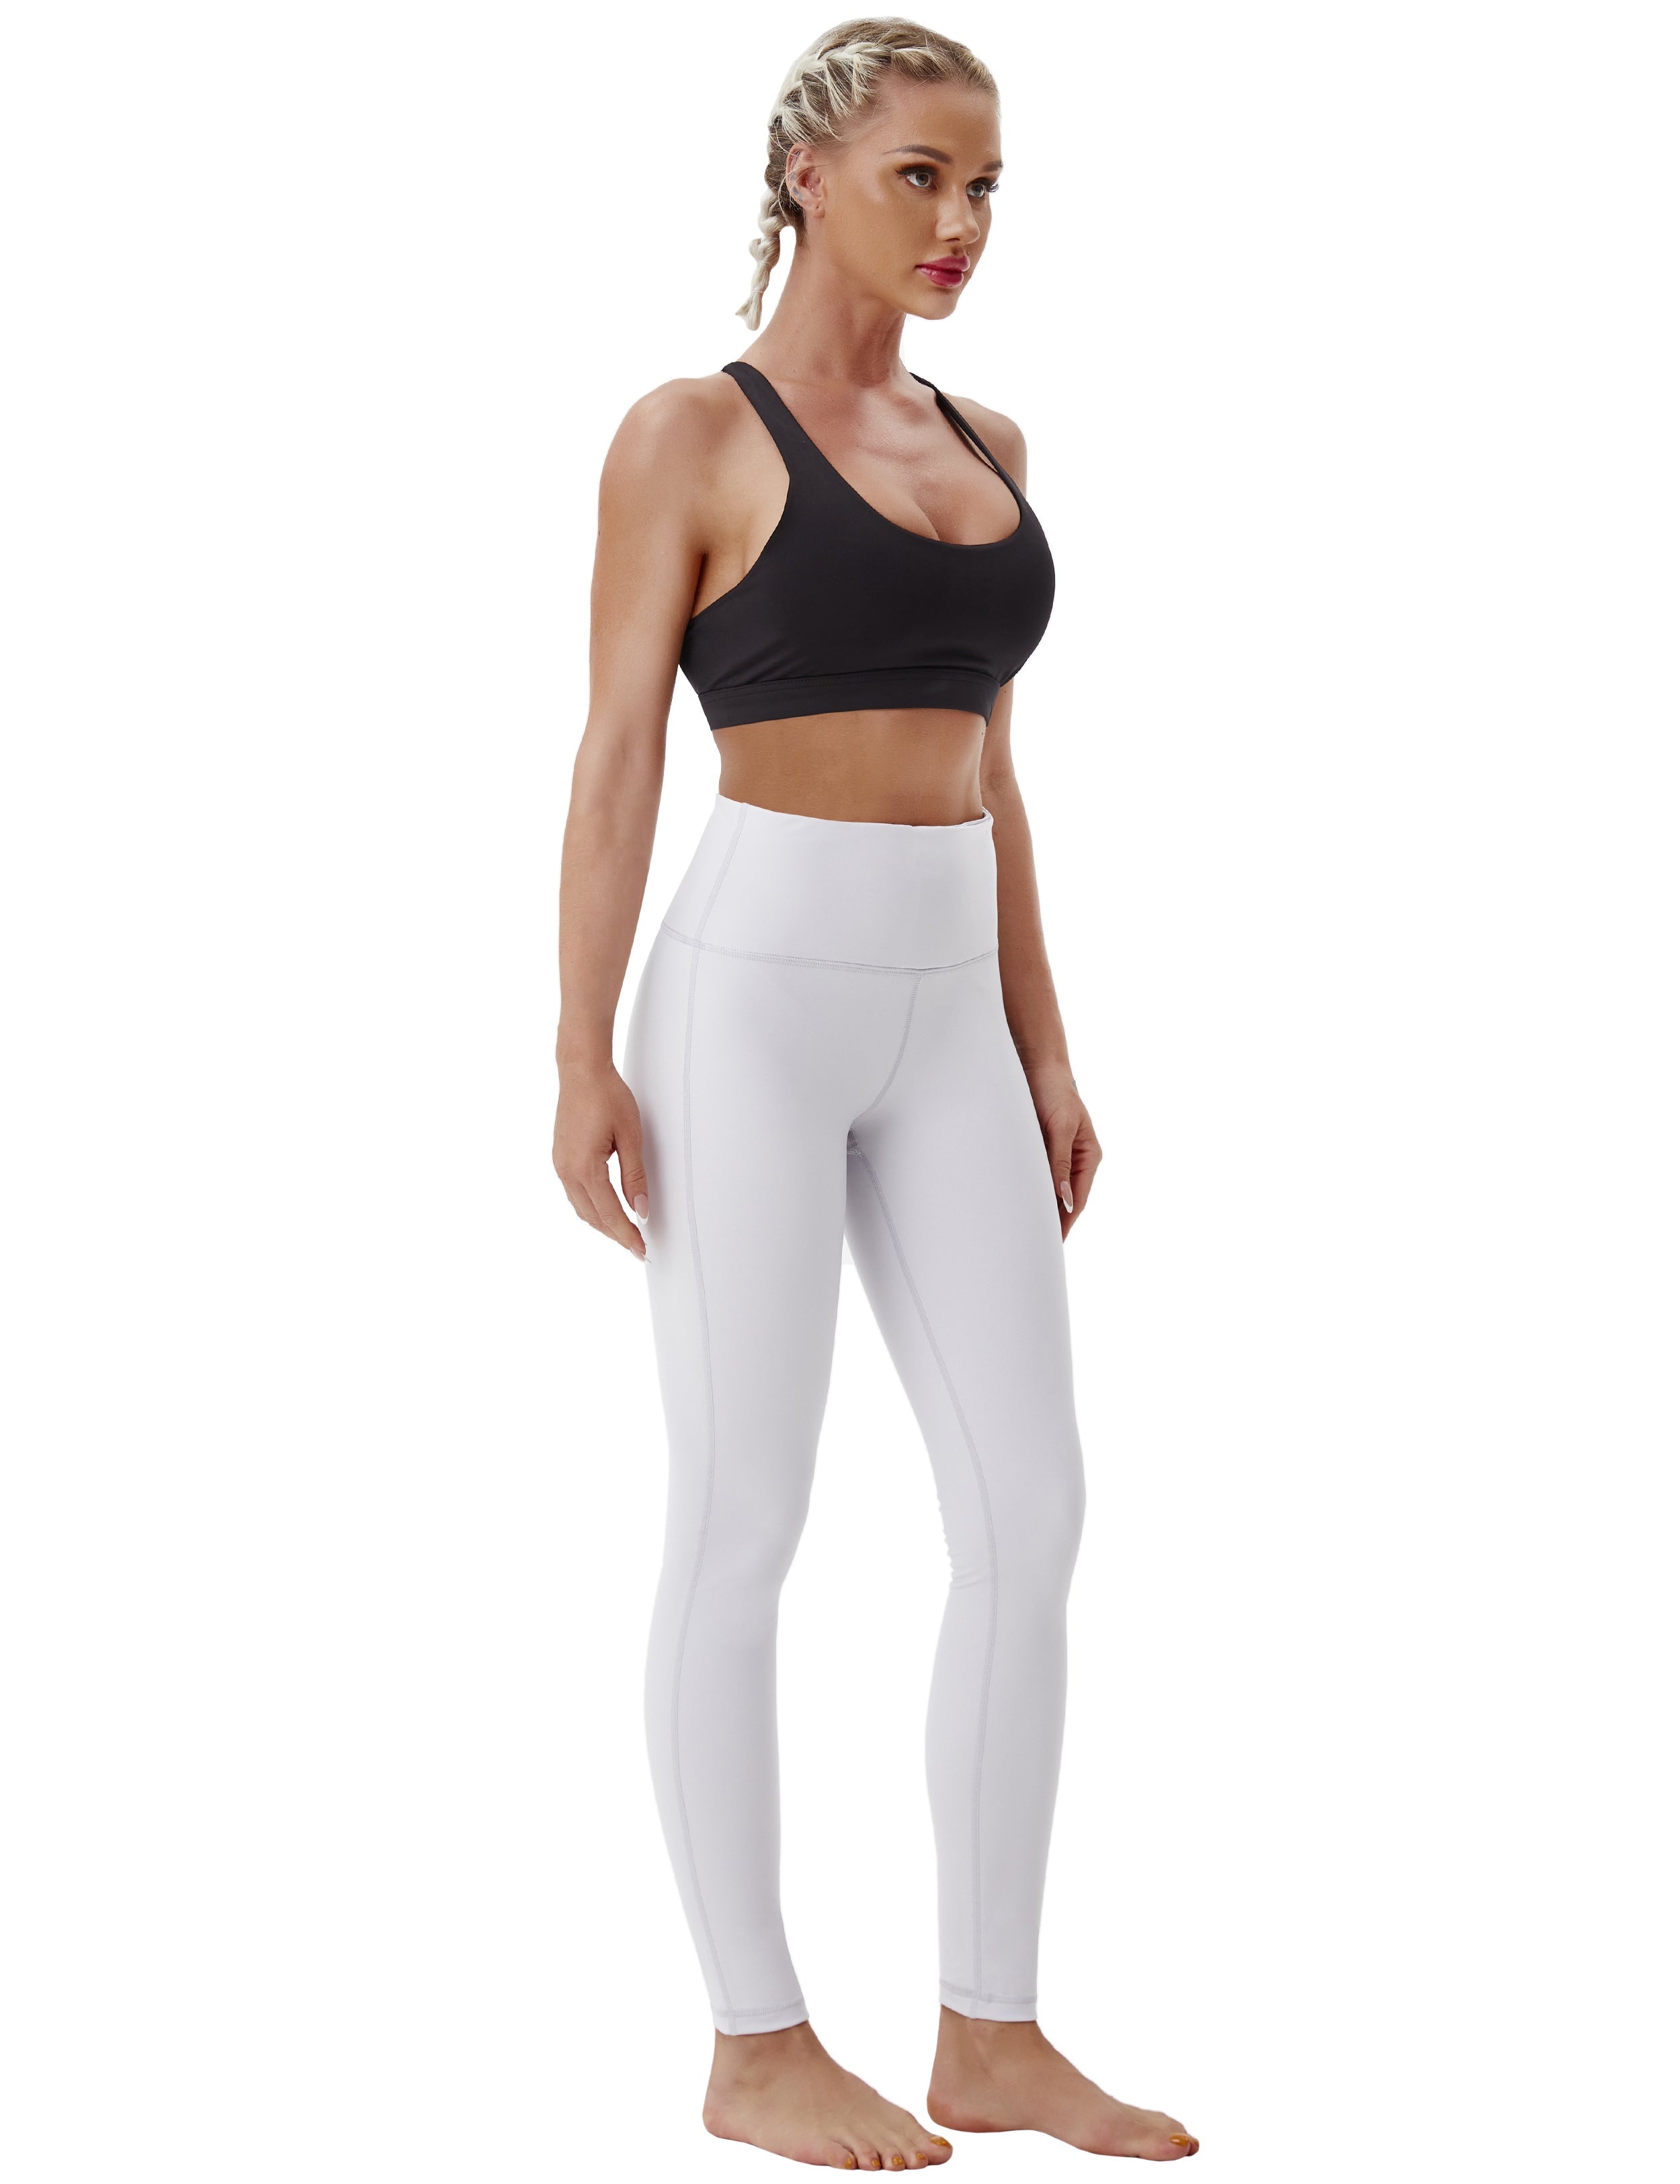 High Waist Side Line Biking Pants lightgray Side Line is Make Your Legs Look Longer and Thinner 75%Nylon/25%Spandex Fabric doesn't attract lint easily 4-way stretch No see-through Moisture-wicking Tummy control Inner pocket Two lengths